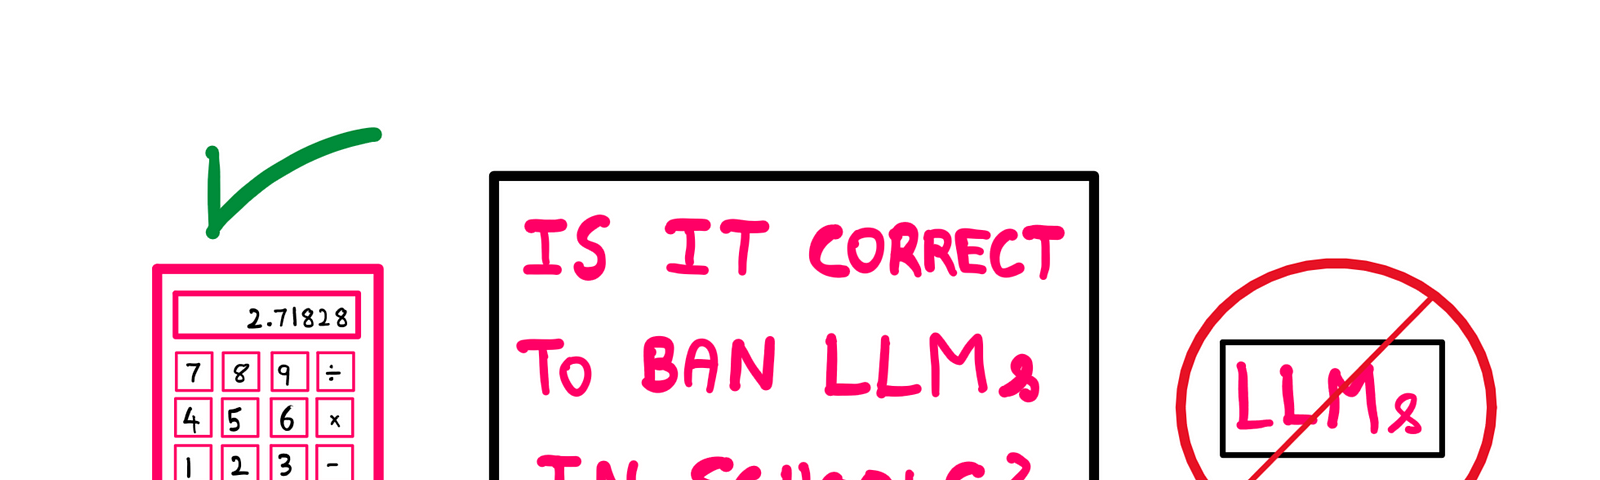 Is it correct to ban LLMs in schools ? — A calculator with on the left with a green checkmark on its top, a sign with “LLMs” with a ban marking on the right, and a sign with the following text at the center: “Is it correct to ban LLMs in schools?”